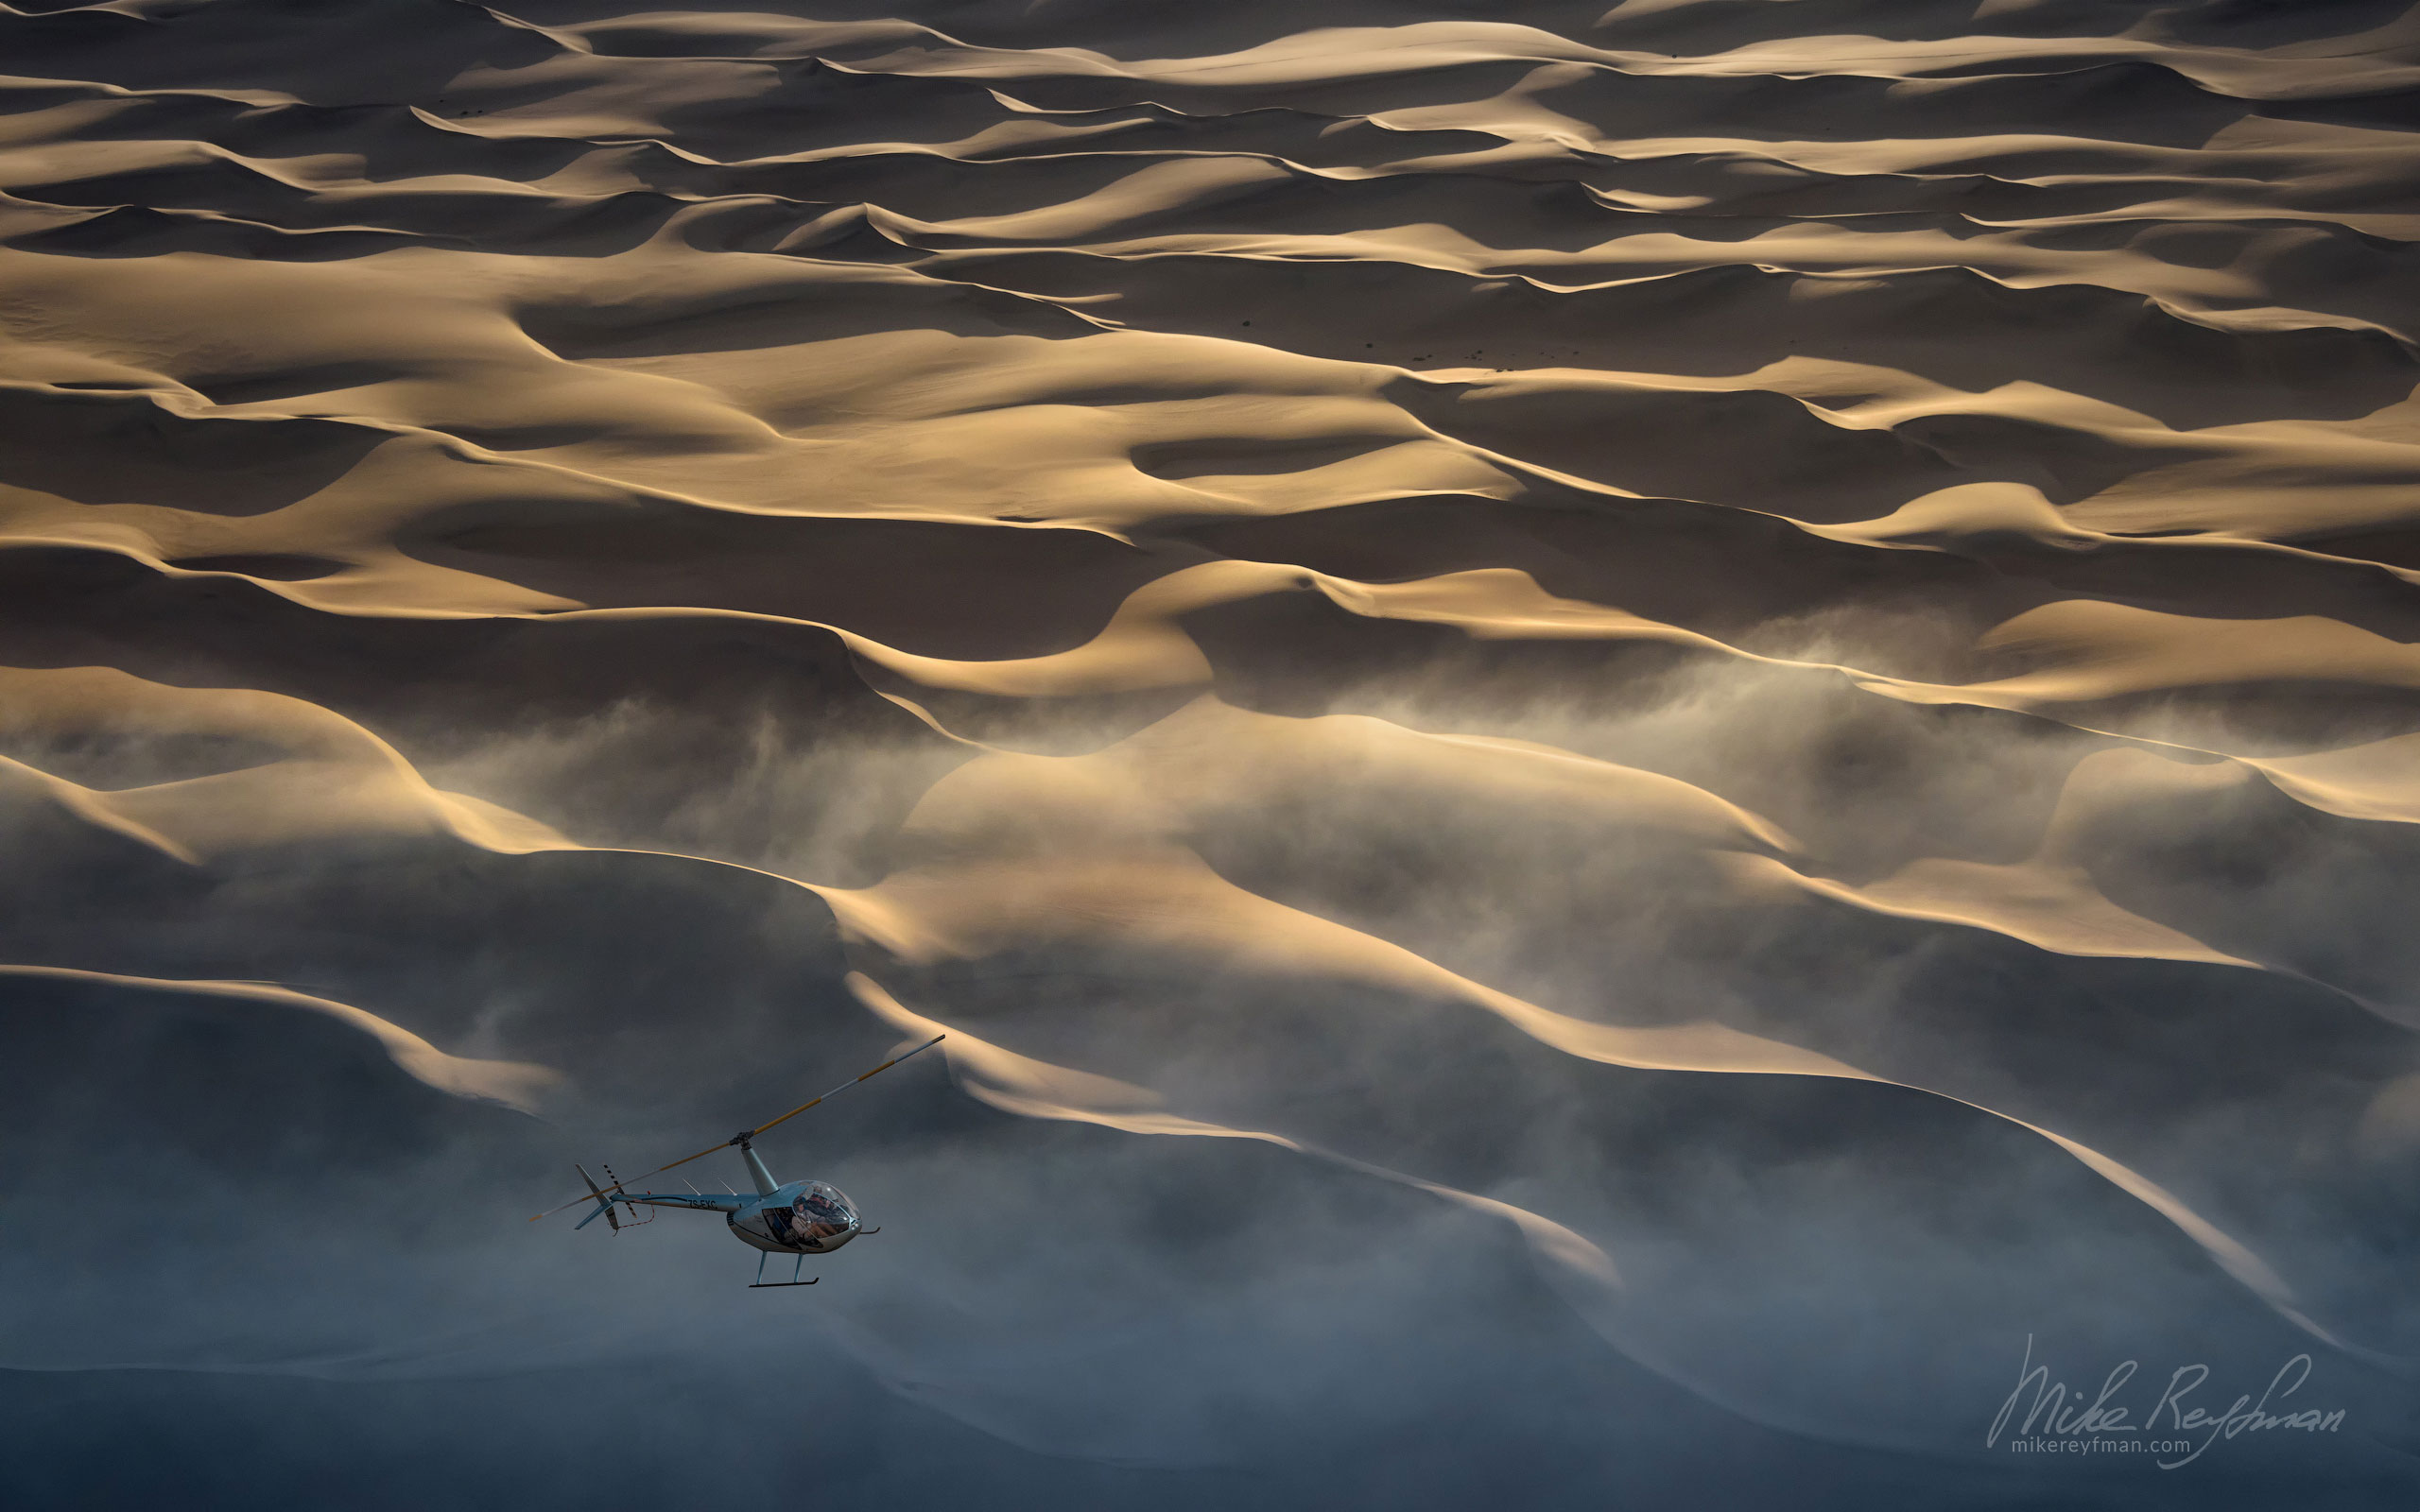 Helicopter in the fog over sand dunes of the Skeleton Coast. Namib Skeleton Coast National Park, Namibia SCW_007_10P8364 - Shipwrecks and Endless Dunes of Namib Skeleton Coast NP, Dense ocean fogs of the Benguela Current, Cape Fur seals, and Walvis Bay Salt Works. Namibia.  - Mike Reyfman Photography